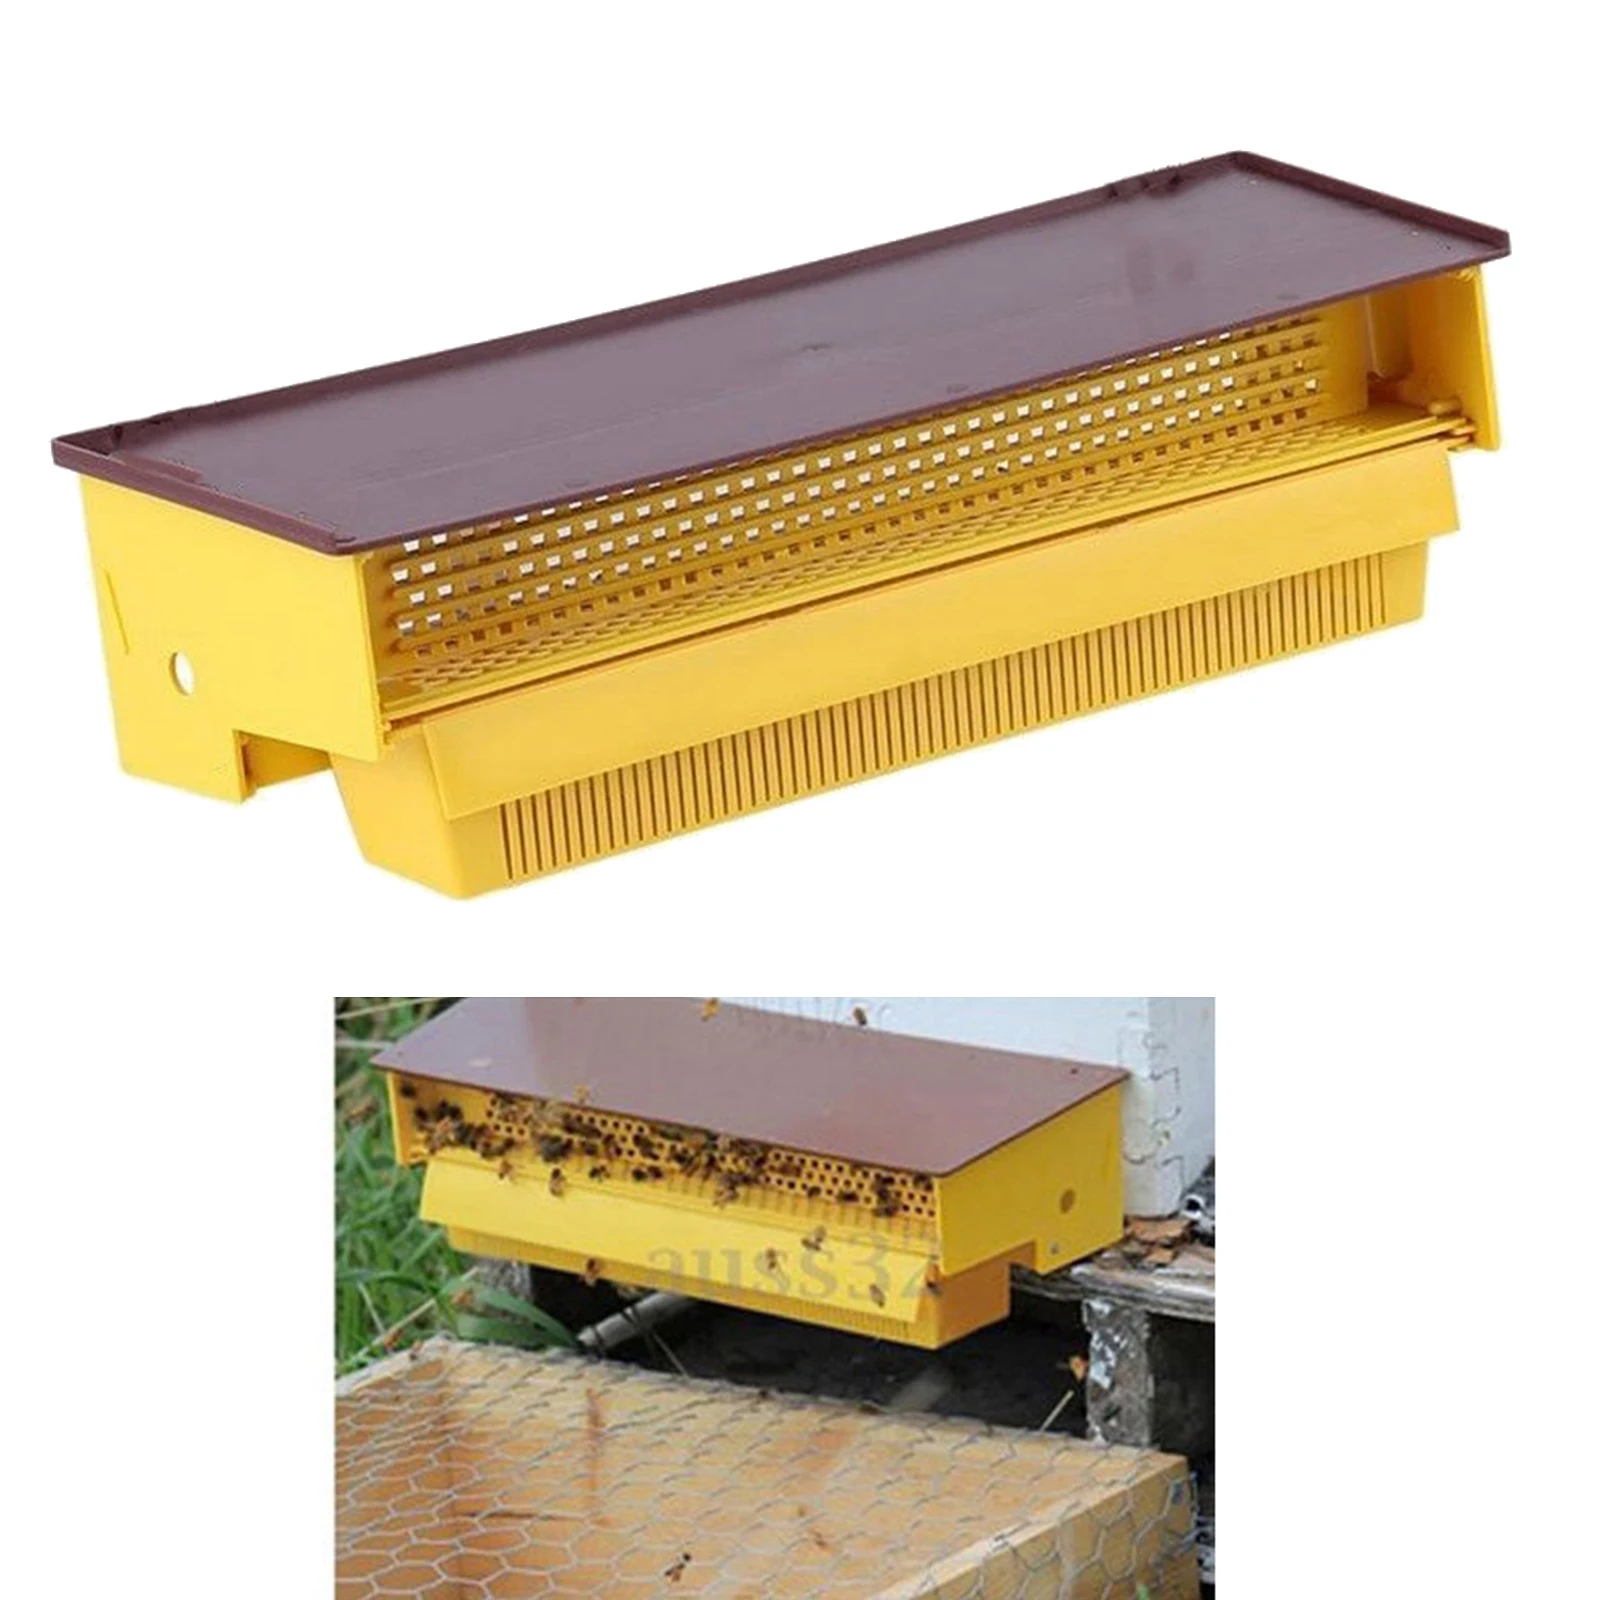 Beekeeping Pollen Trap Removable Pollen Tray Collector Yellow, Easily Adjusted and Assembled